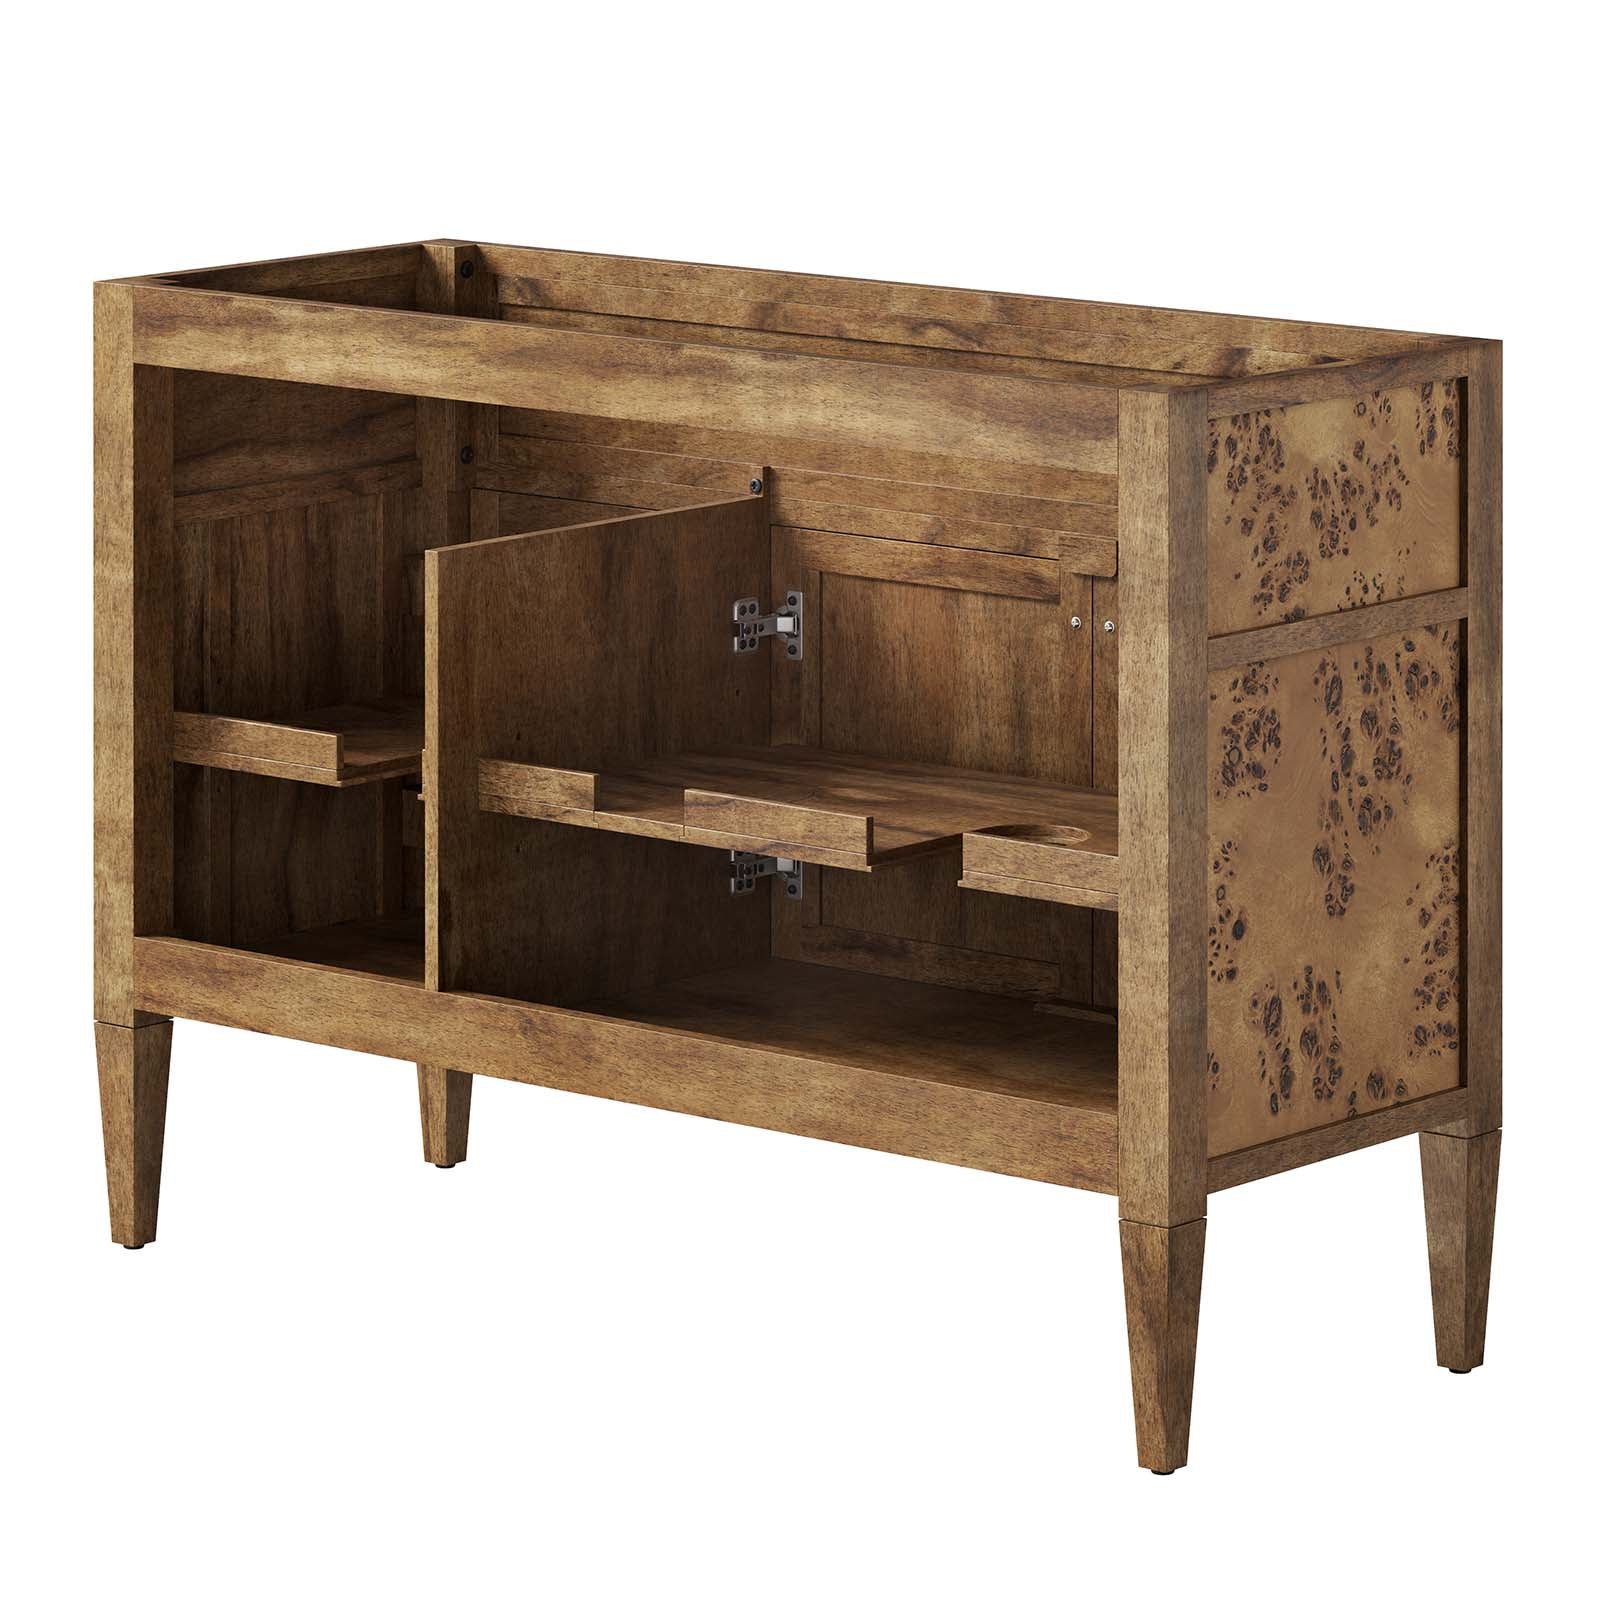 Elysian 48" Wood Bathroom Vanity Cabinet (Sink Basin Not Included) By Modway - EEI-6140 | Bathroom Accessories | Modway - 4